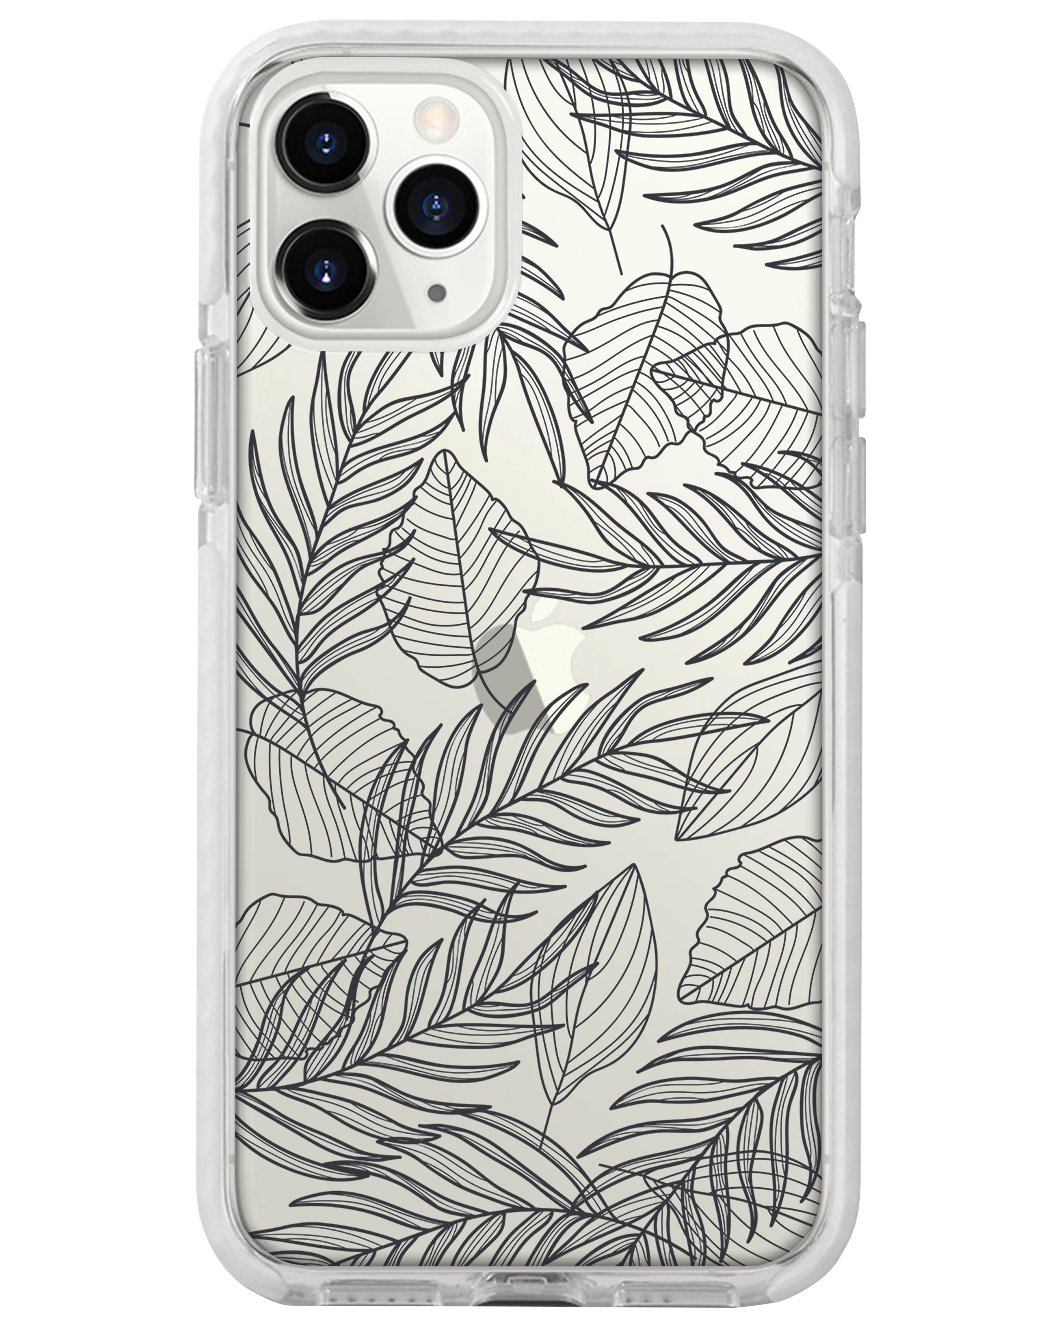 iPhone - Sketchy Tropical 2.0